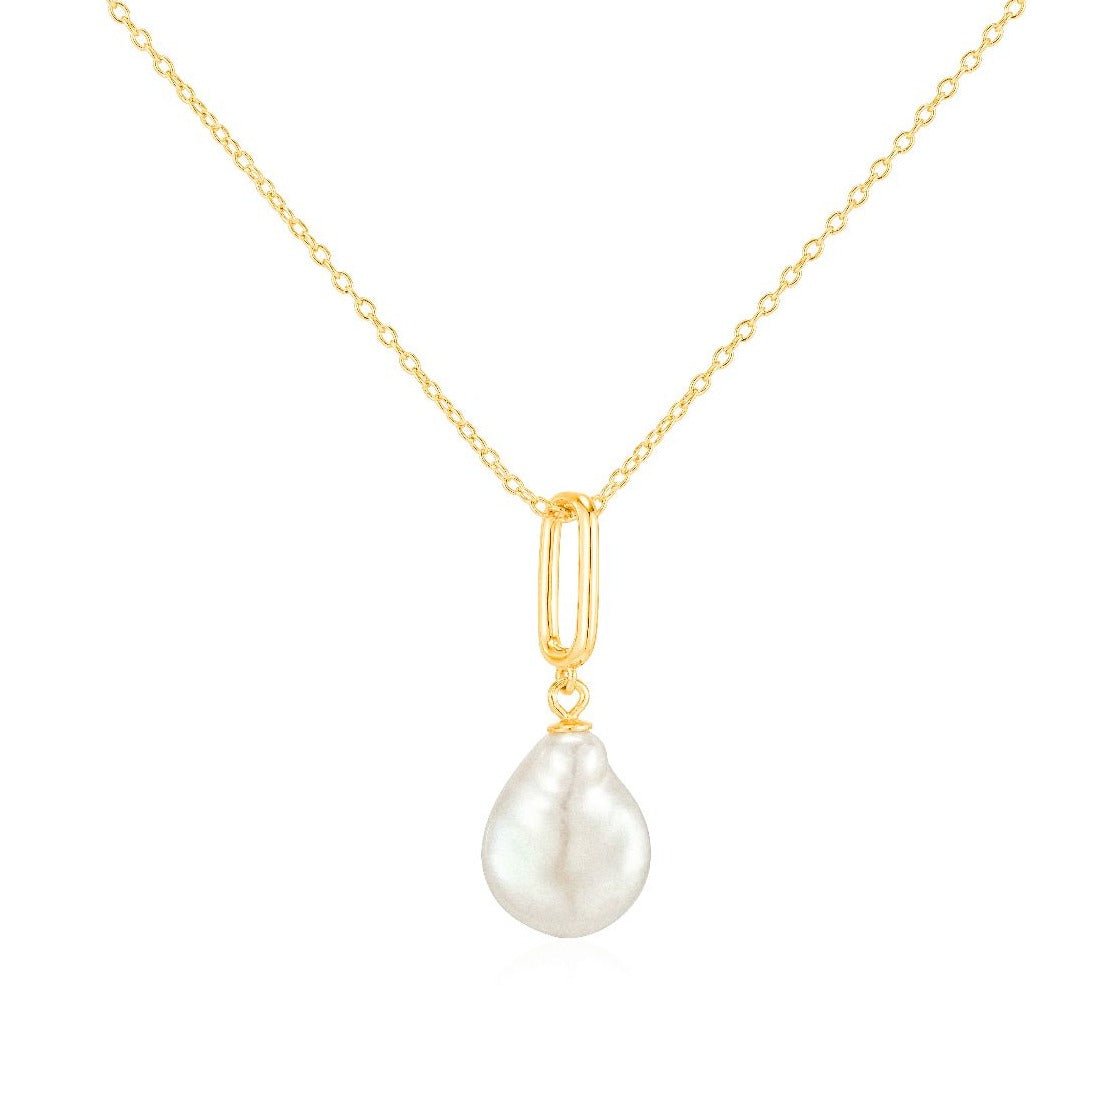 baroque pearl necklace 18k yellow gold